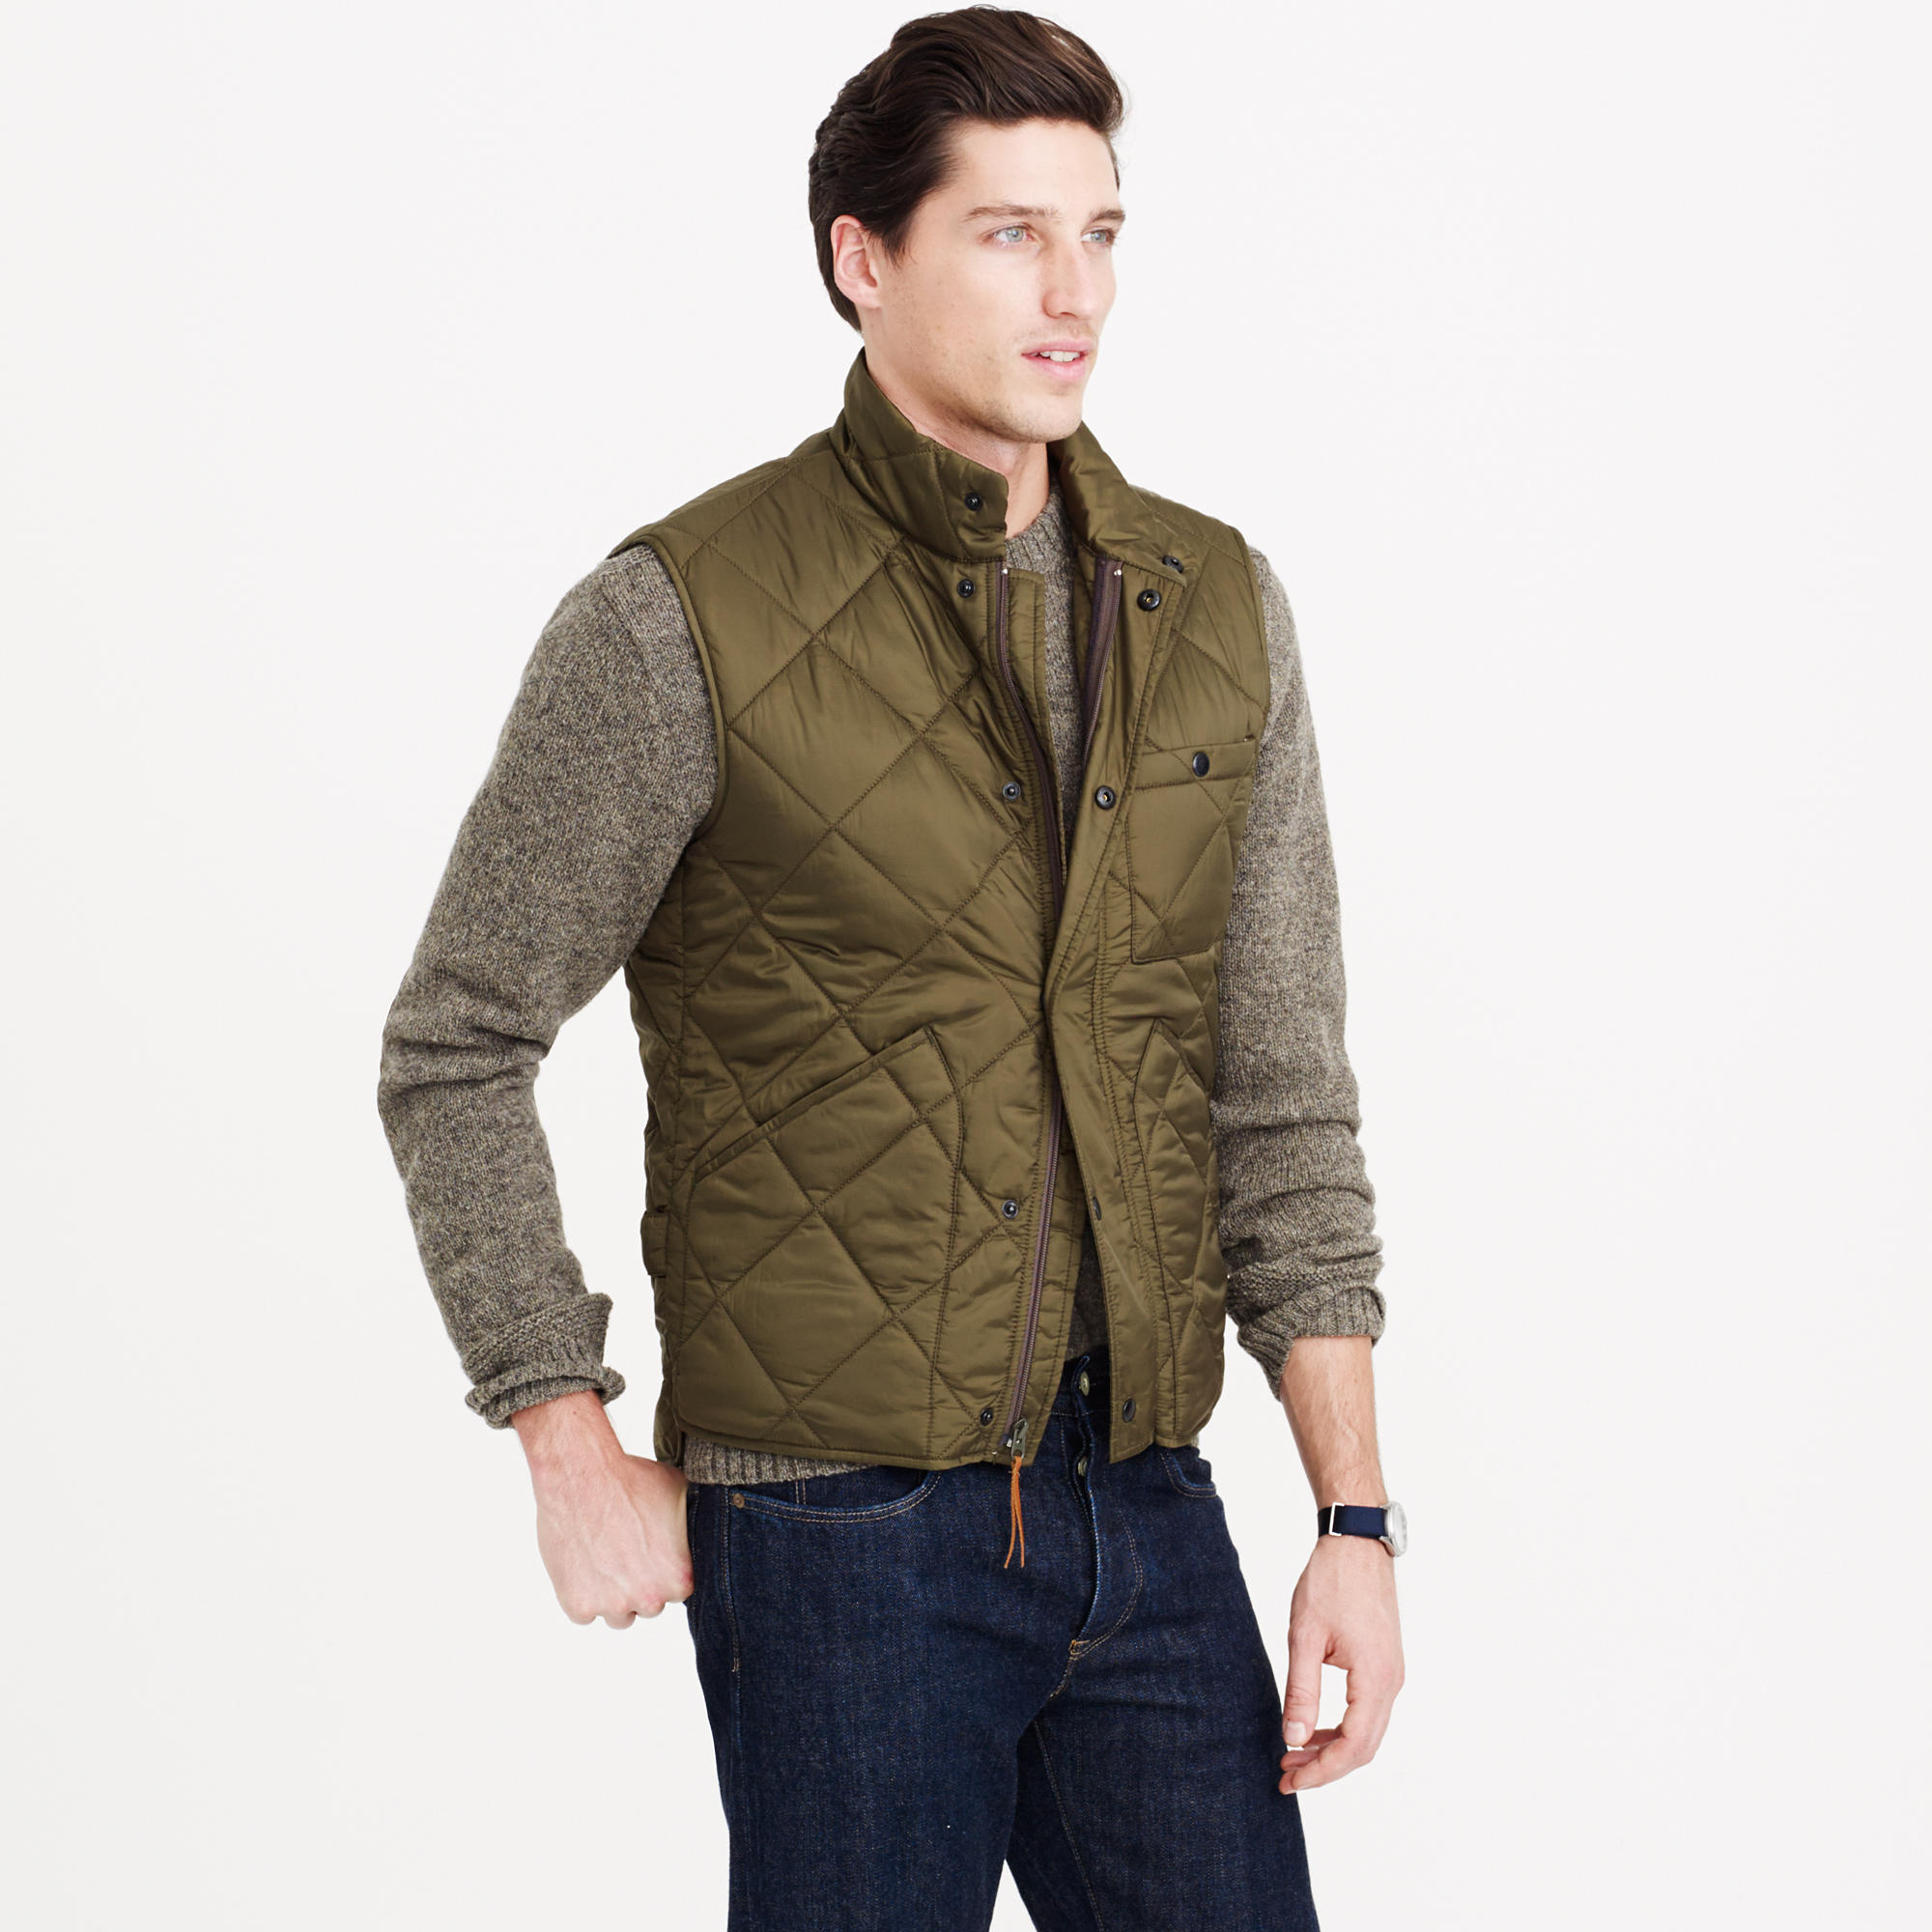 J.Crew Nylon Sussex Quilted Vest in Green for Men - Lyst